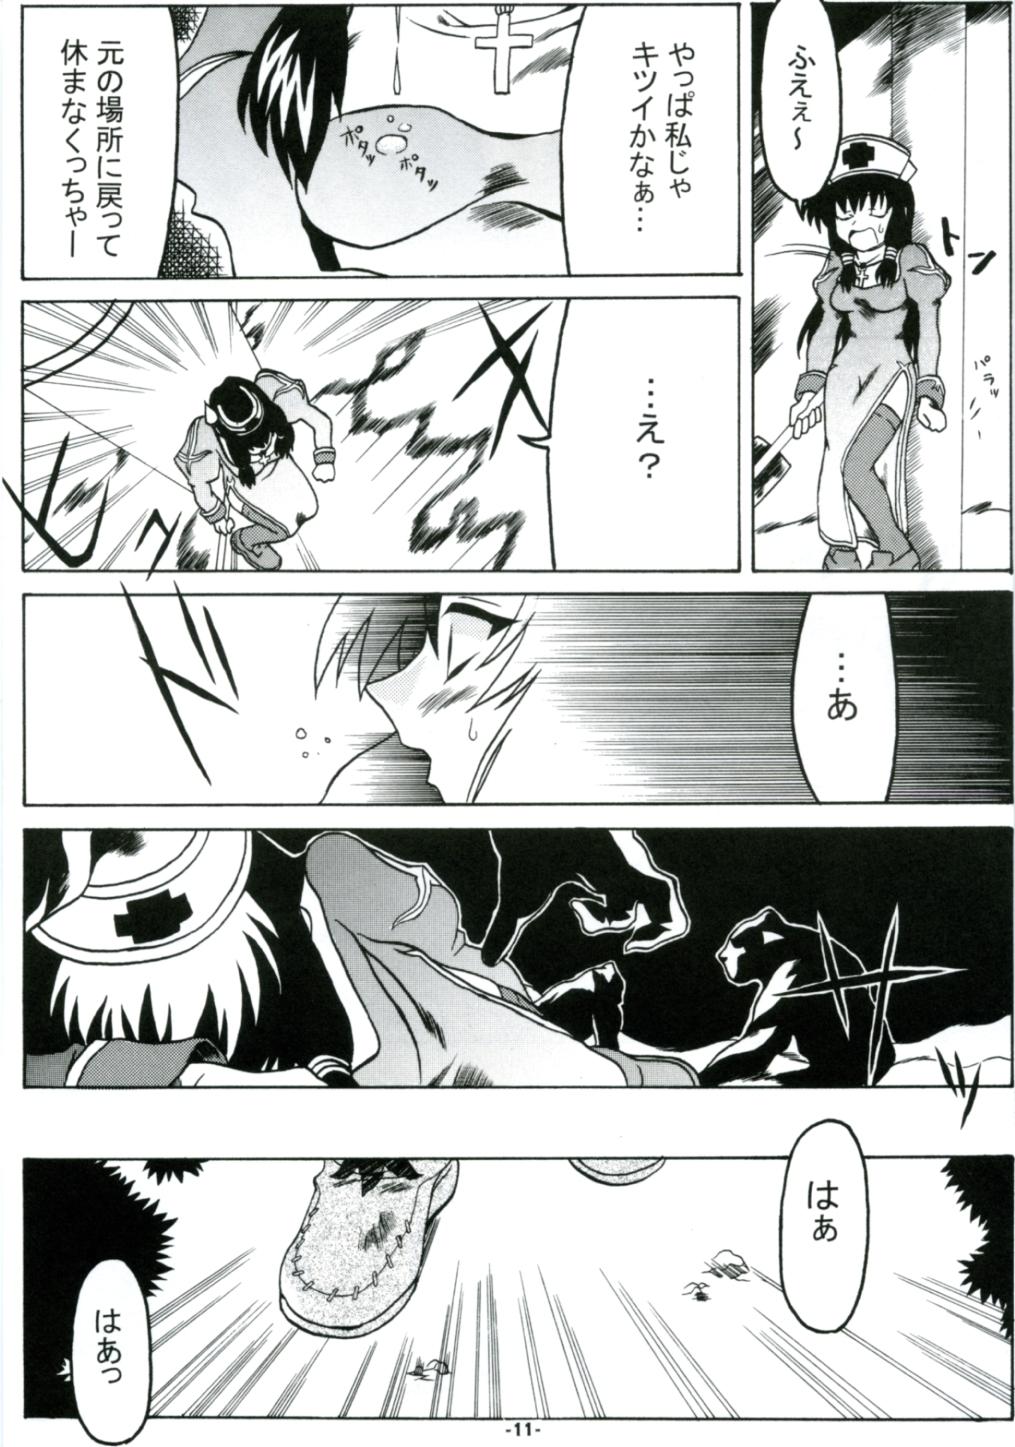 Tease Steal Heart - Ragnarok online Sixtynine - Page 10